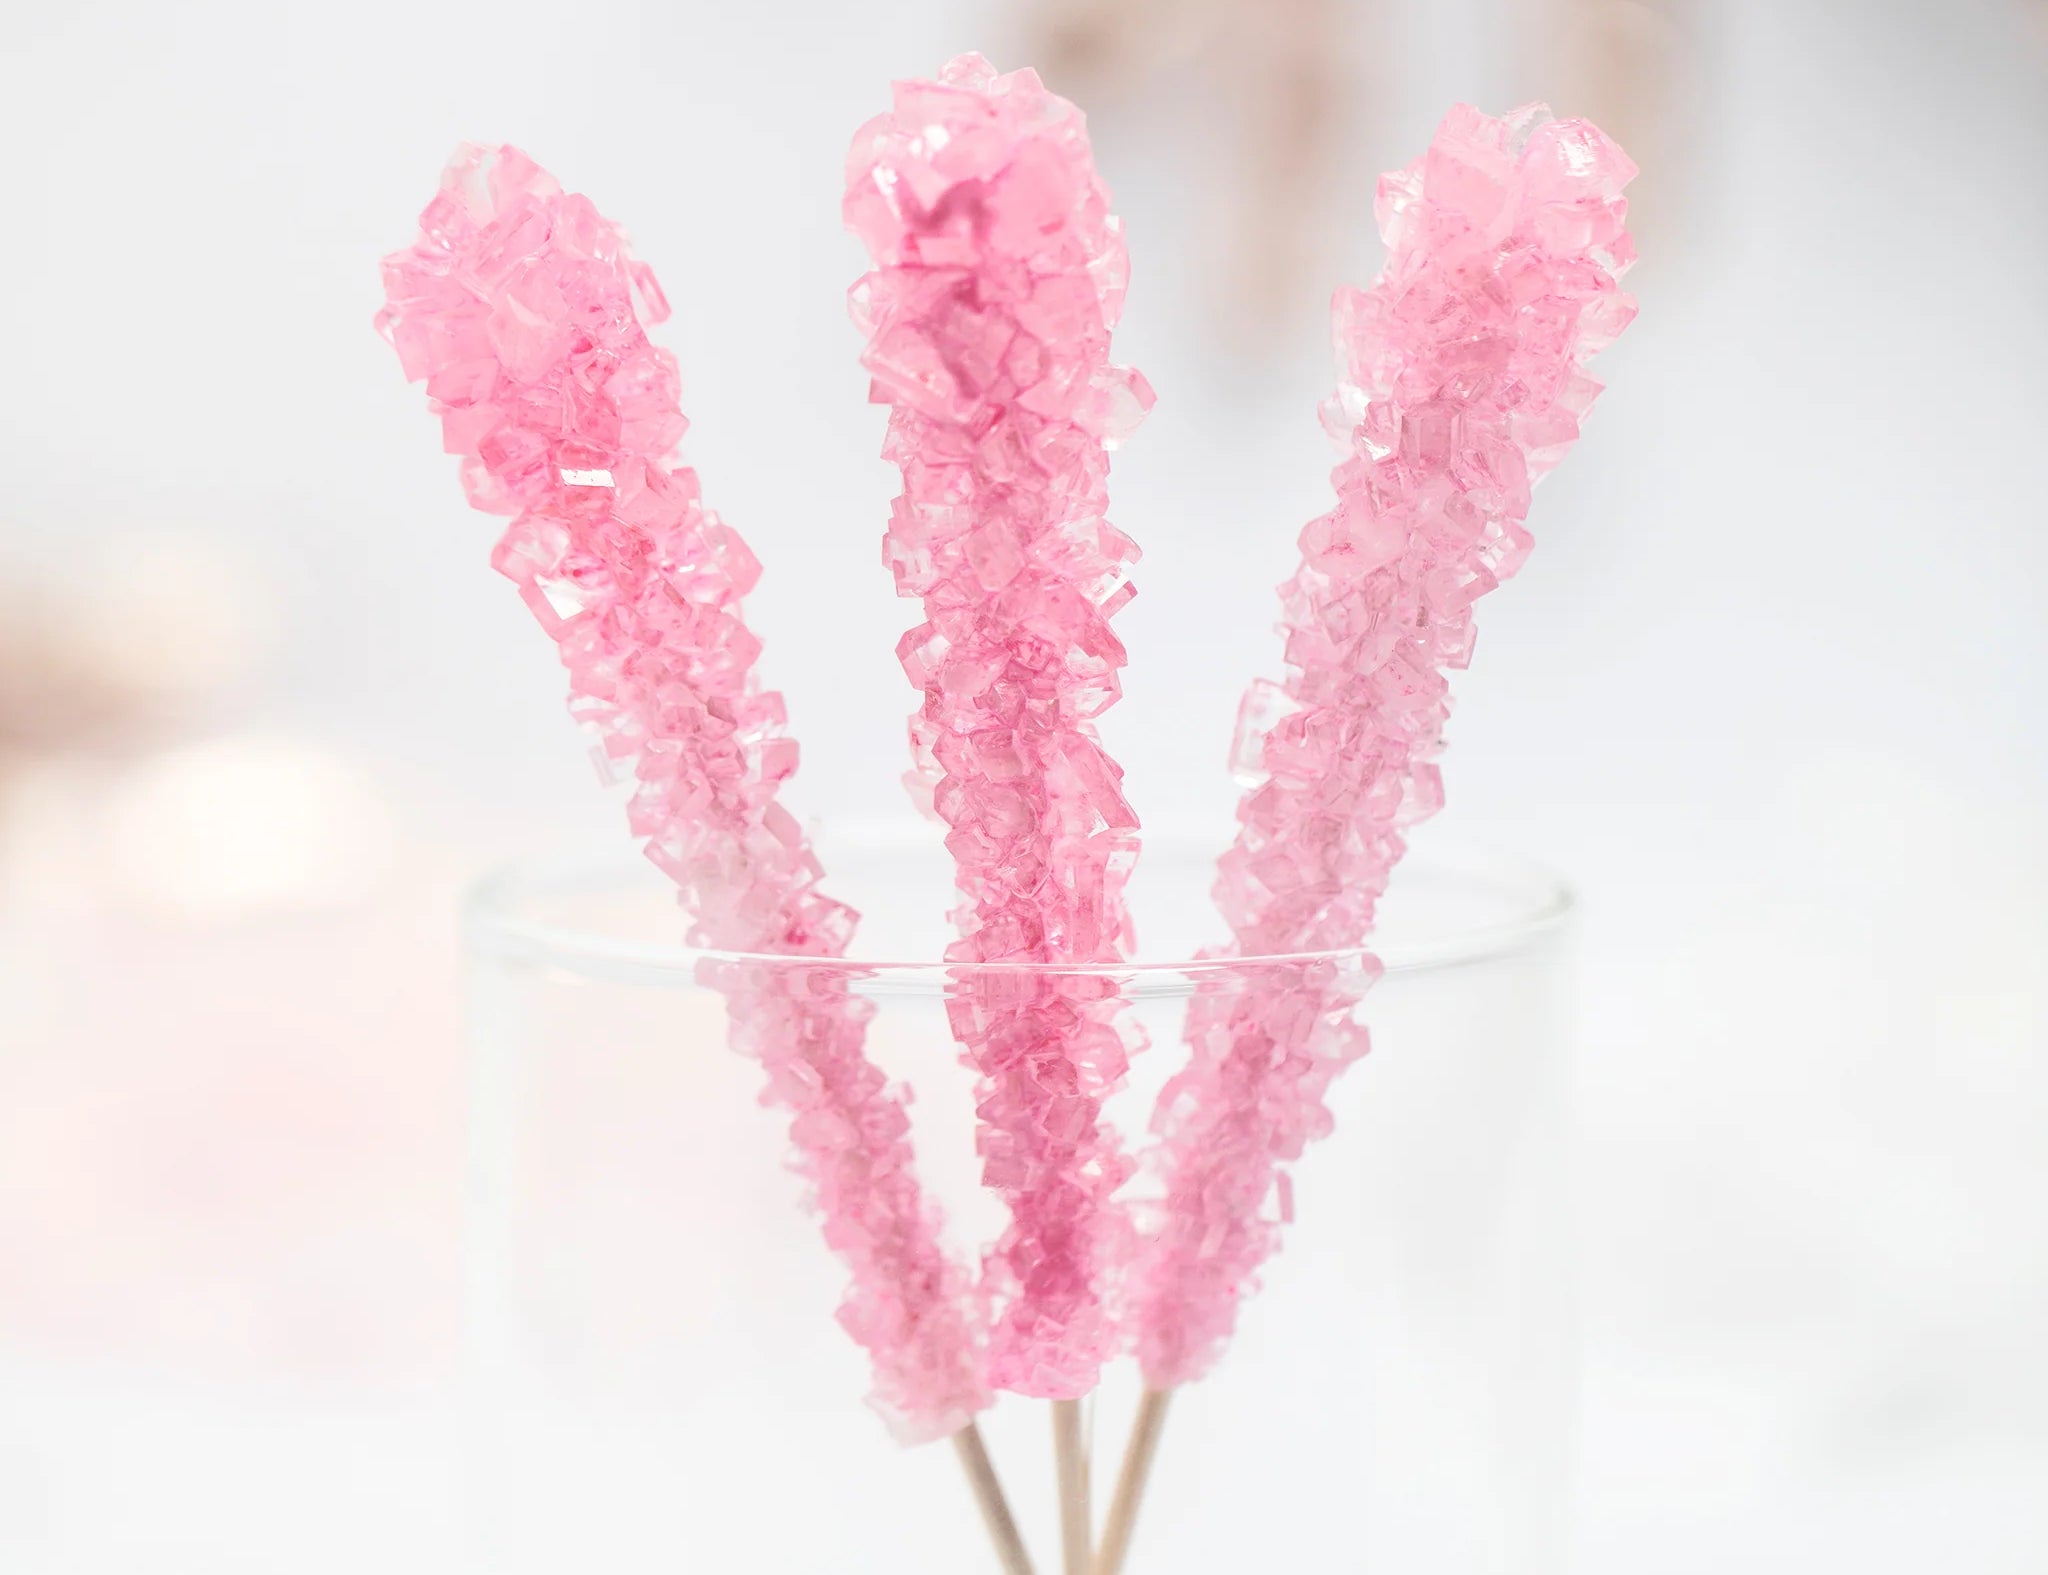 Three Nostalgic bubblegum flavored Think Pink Rock Candy by Lolli & Pops in clear class.